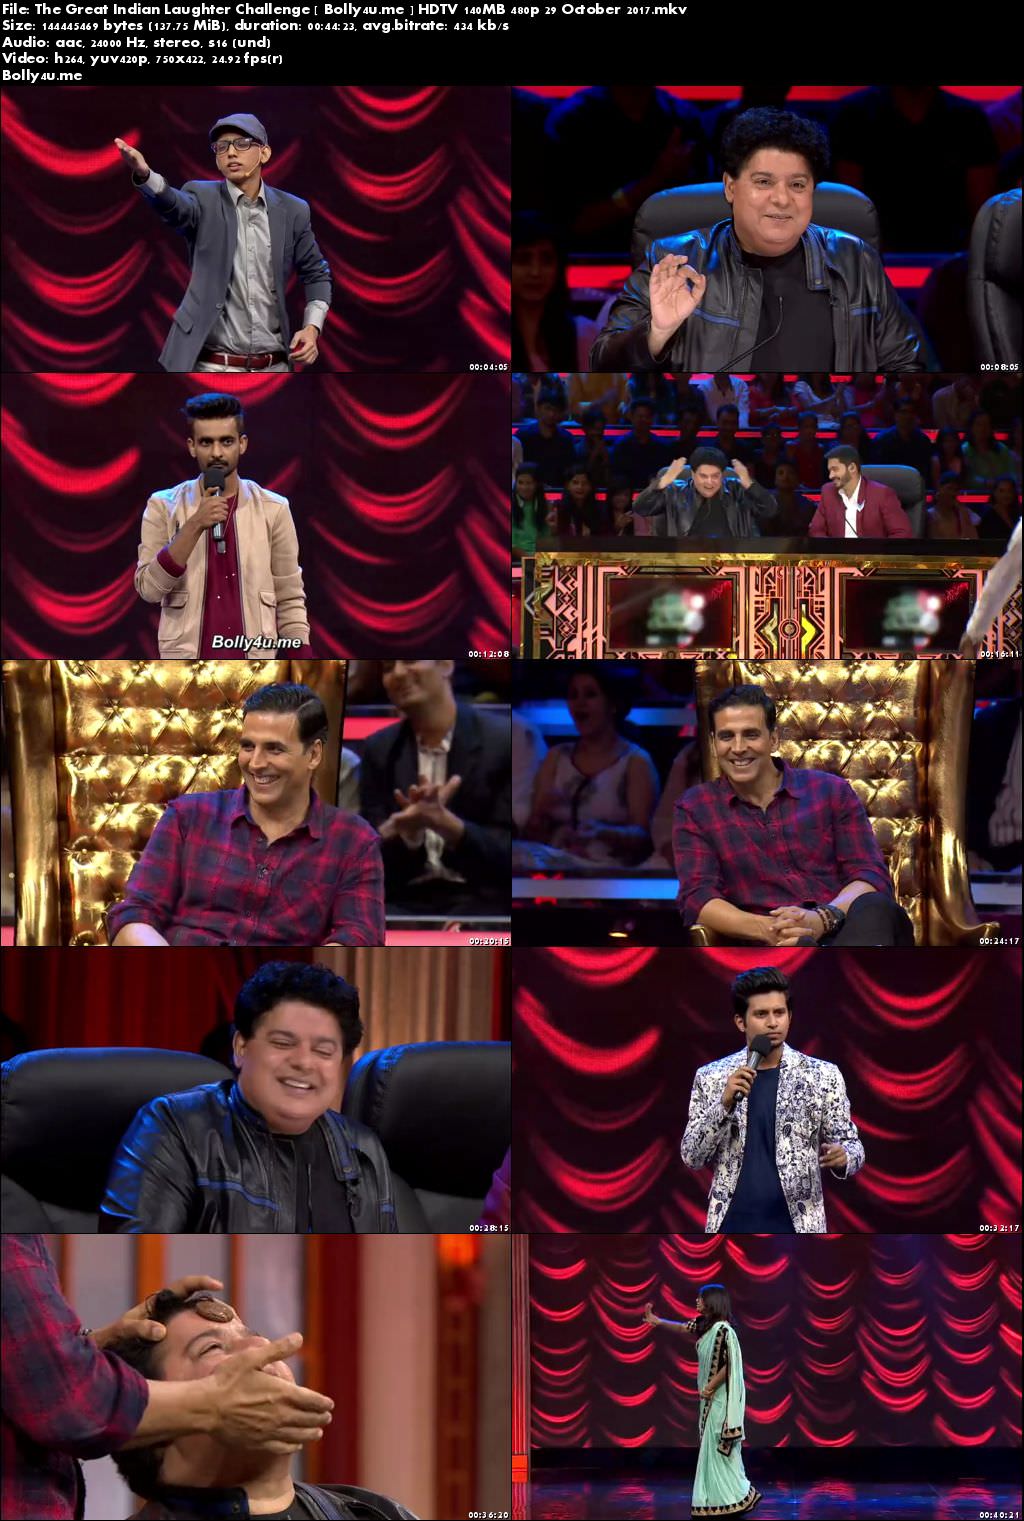 The Great Indian Laughter Challenge HDTV 140MB 480p 29 October 2017 Download